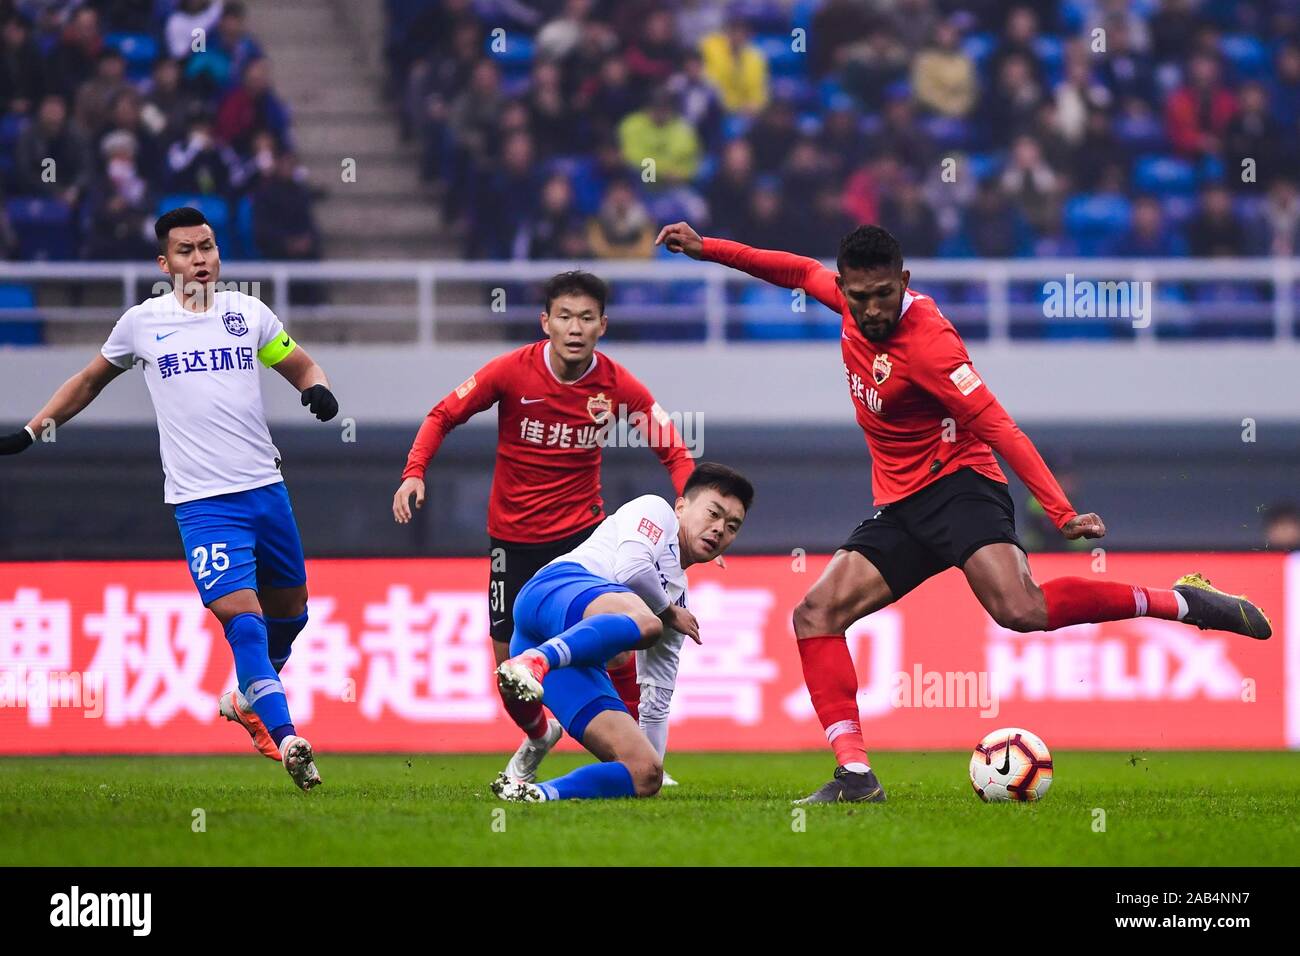 Brazilian-born Portuguese football player Dyego Sousa of Shenzhen F.C., right, shoots during the 28th round match of Chinese Football Association Super League (CSL) against Tianjin TEDA in Tianjin, China, 23 November 2019. Tianjin TEDA slashed Shenzhen F.C. with 3-0. Stock Photo